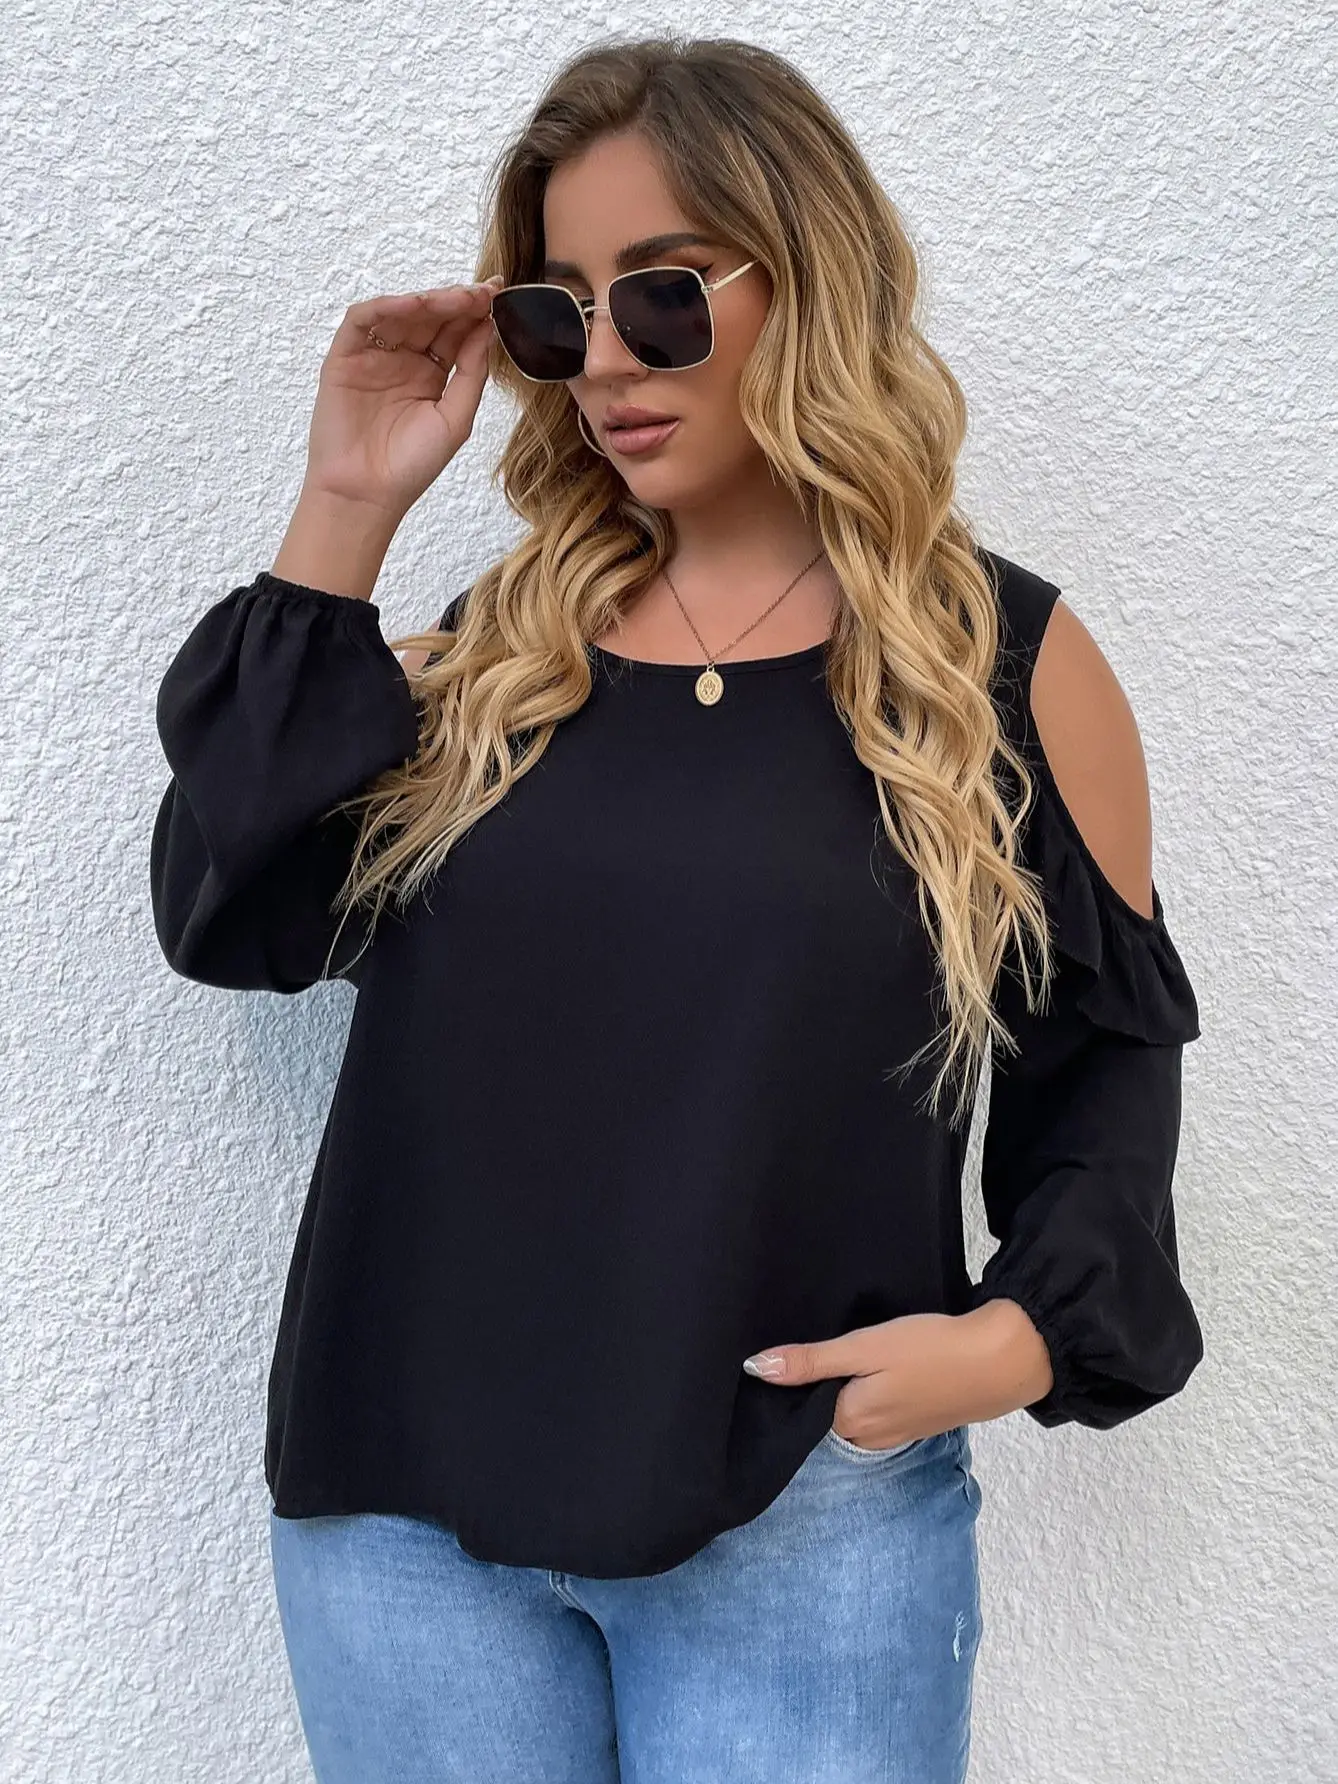 Large Plus Size 4XL Blouses Women Autumn 2022 Hollow Out Long Sleeve Black Oversized Tops Cotton Casual Solid Ladies T Shirts